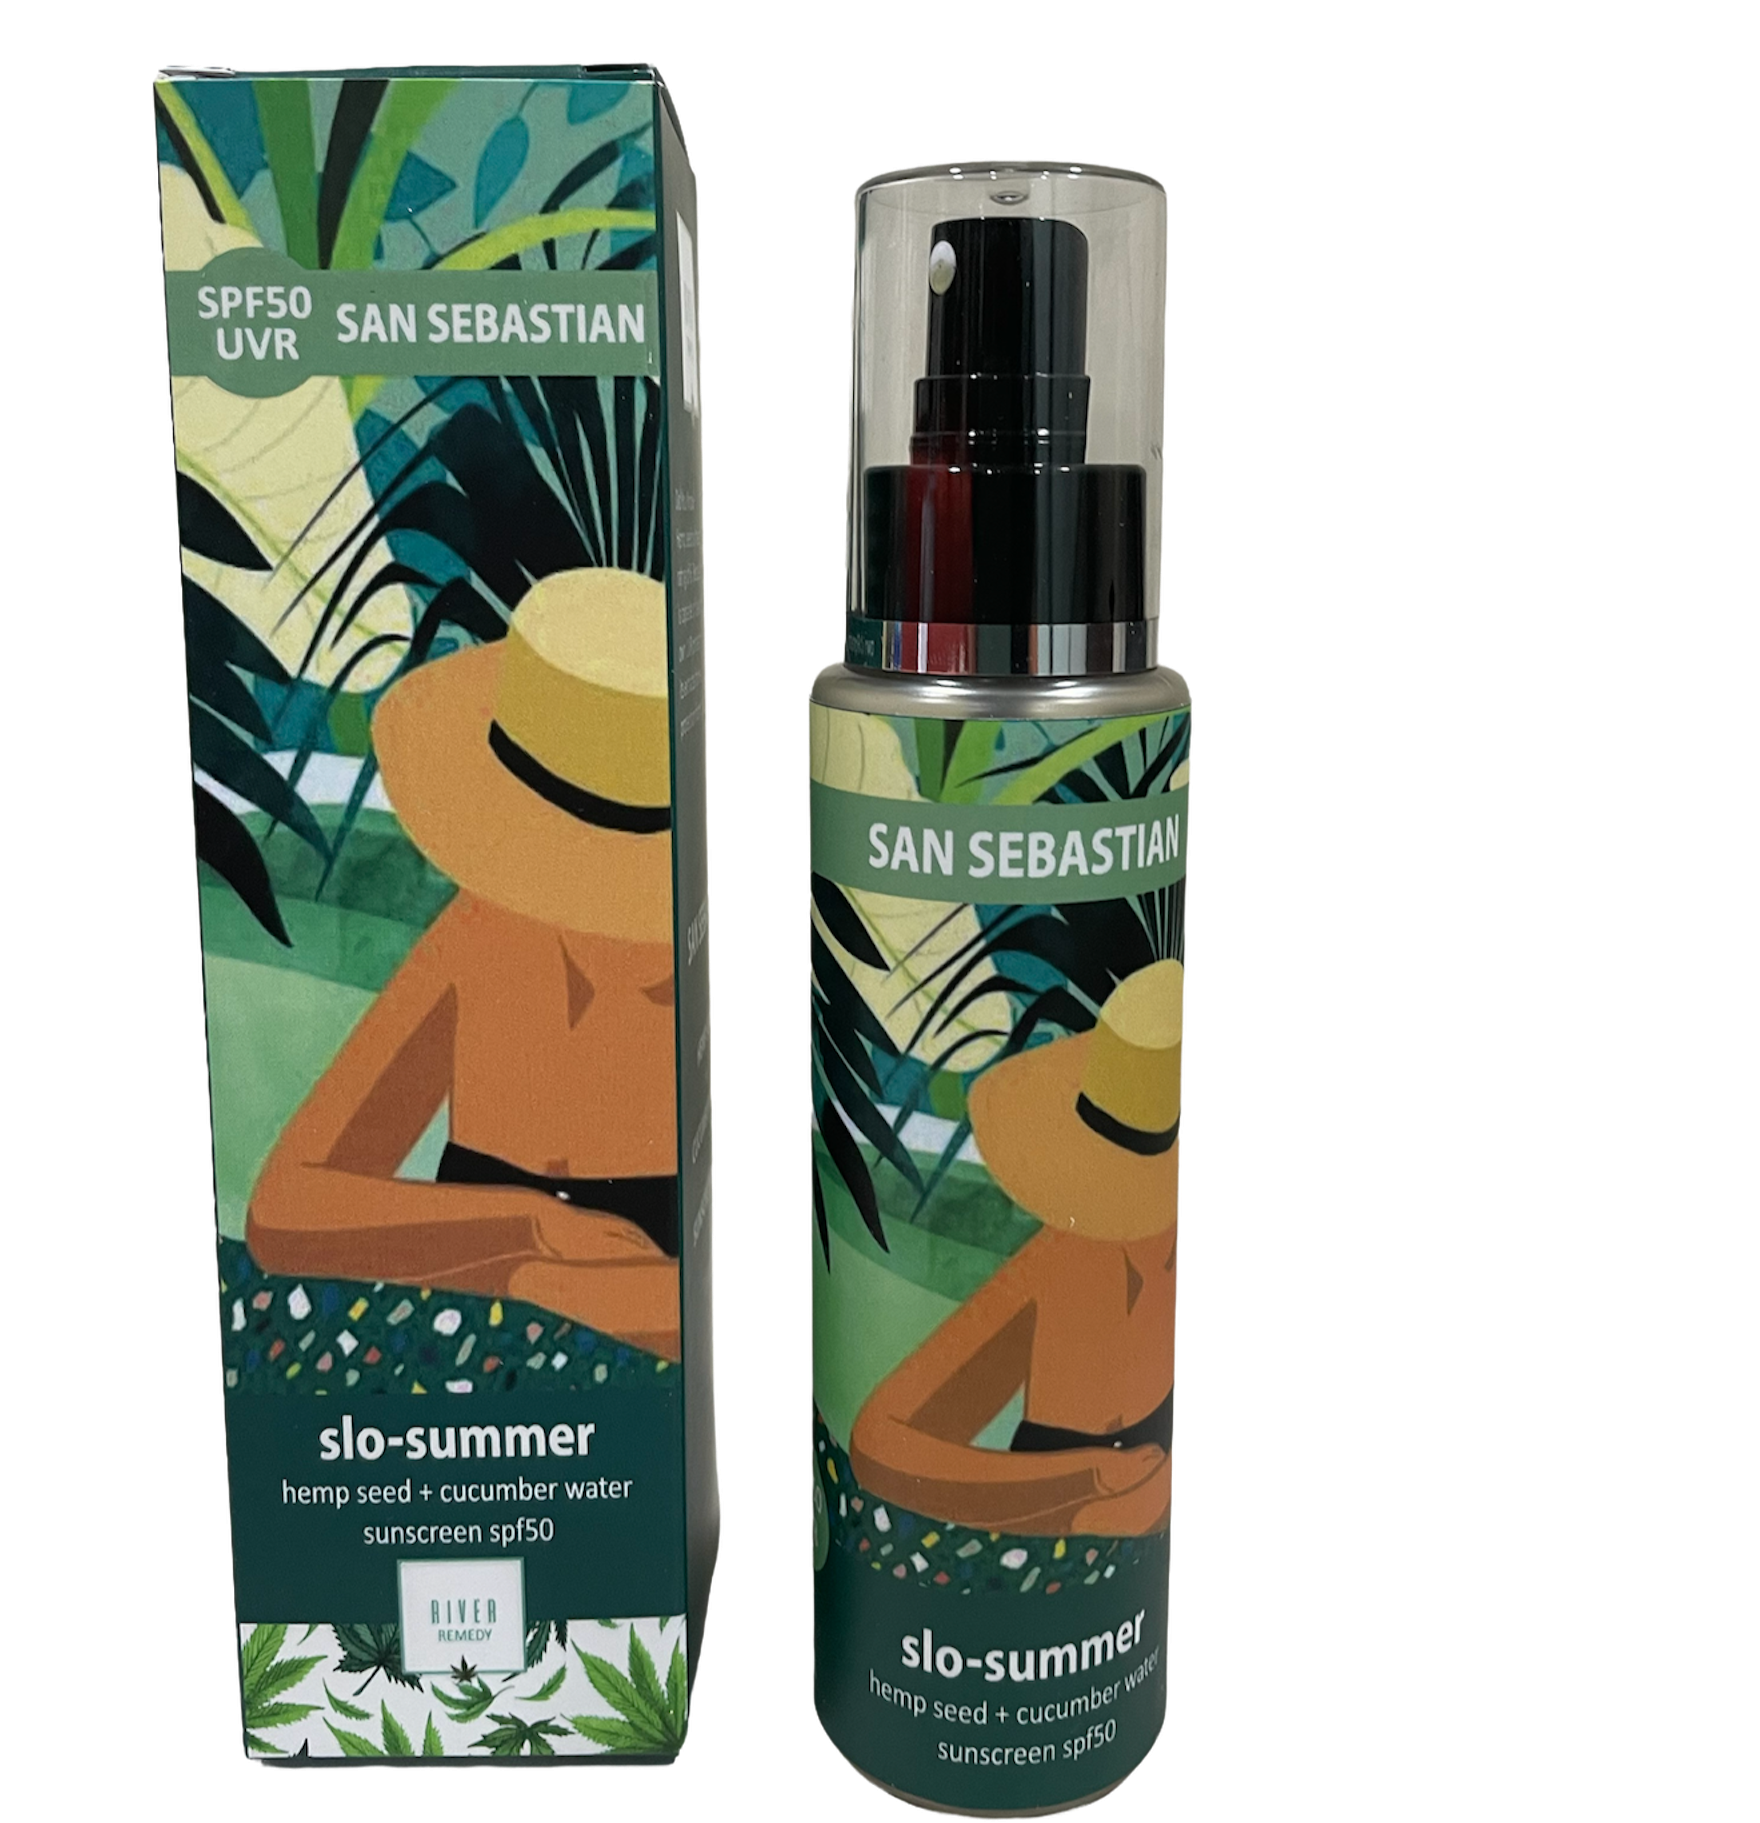 Buy River Remedy - Sunscreen - Hempivate